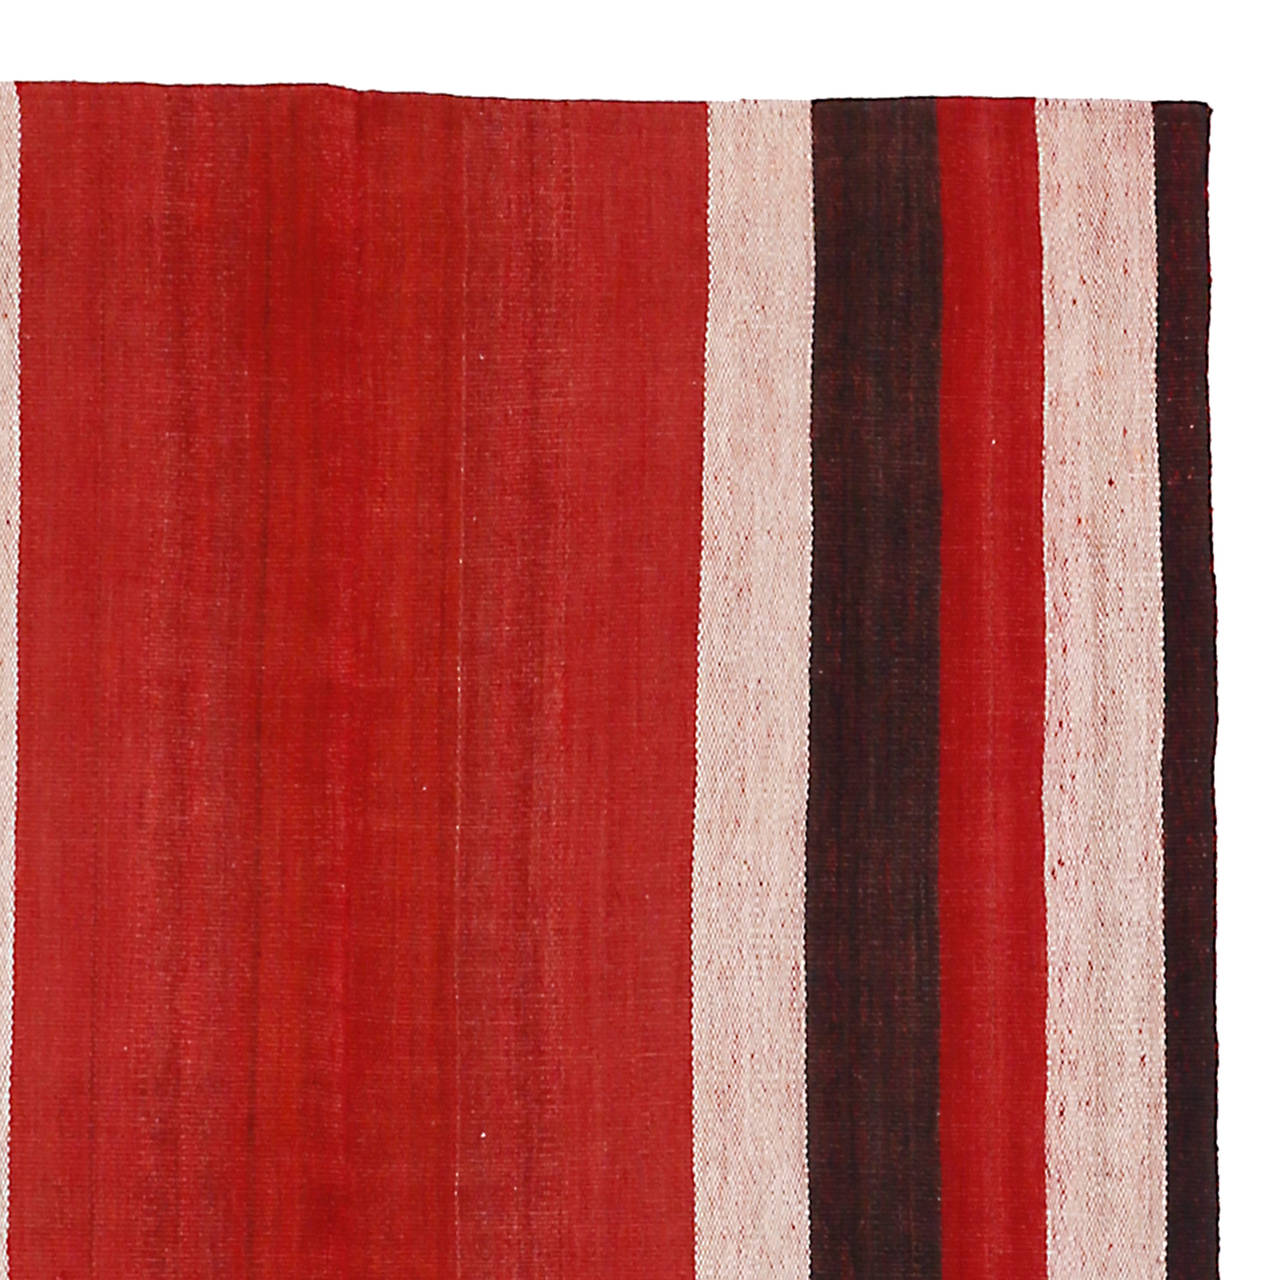 A colorful flat-weave composed of two panels joined together at the center woven in the weft-substitution technique, also known as Jajim. These flat weaves were used in the tents of the Kurdish nomadic tribes inhabiting the mountainous regions of